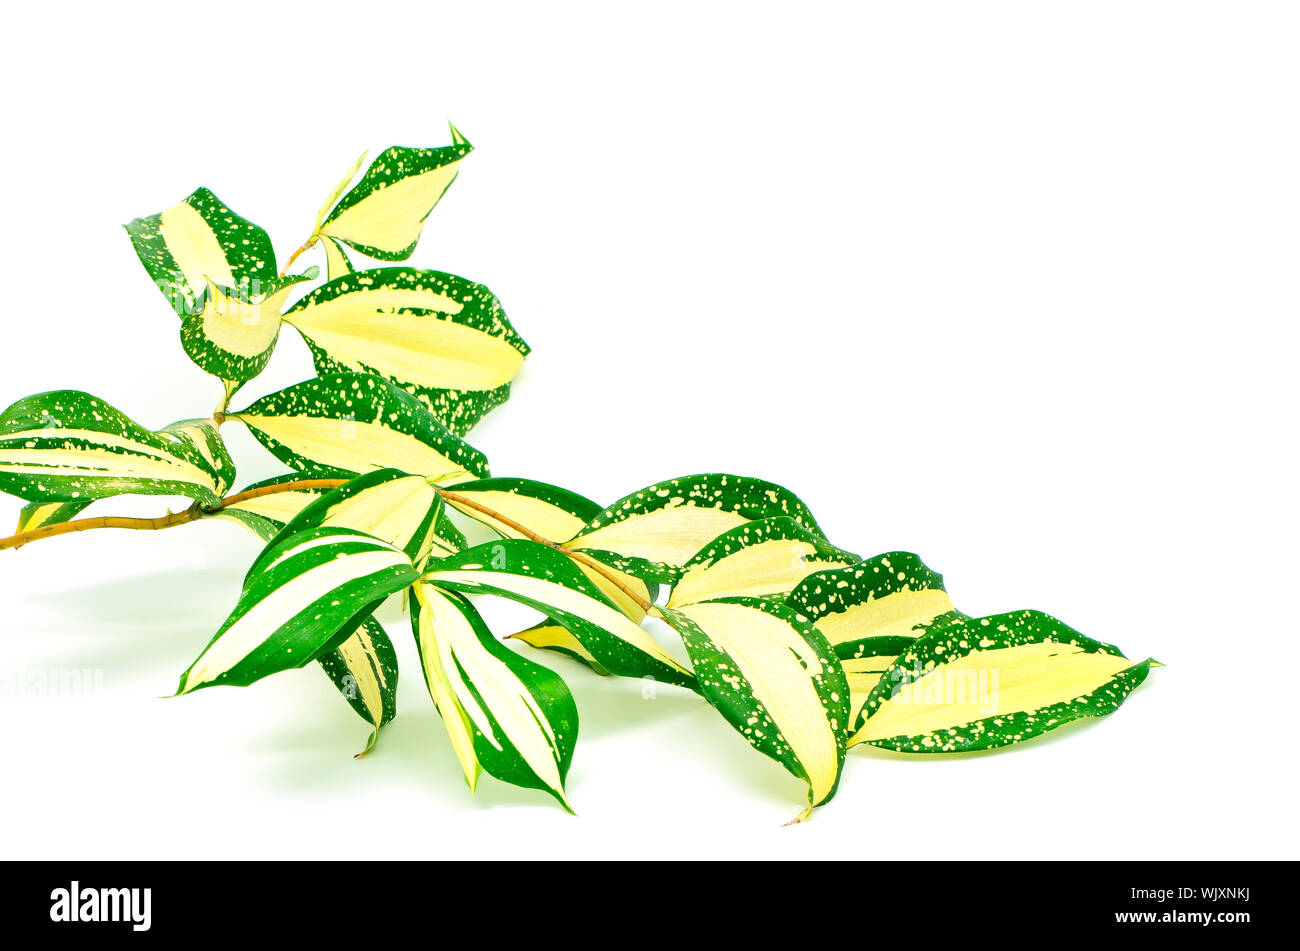 Foliage leaves of dracaena, Gold Dust dracaena or Spotted dracaena, stripped form, isolated on a white background Stock Photo